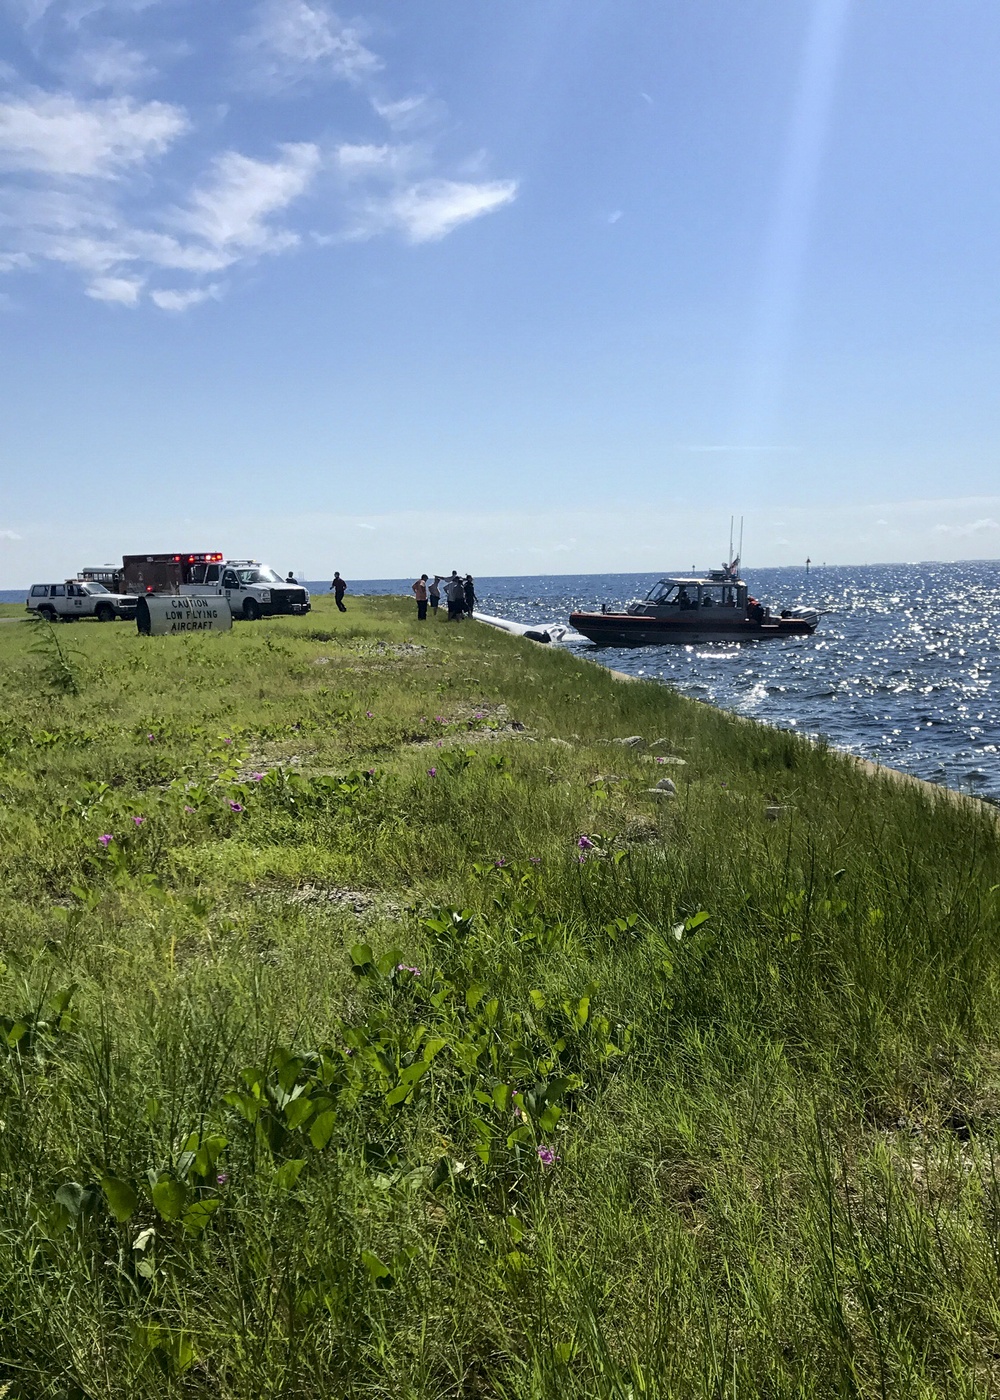 Coast Guard rescues 2 after plane crashes near St. Petersburg